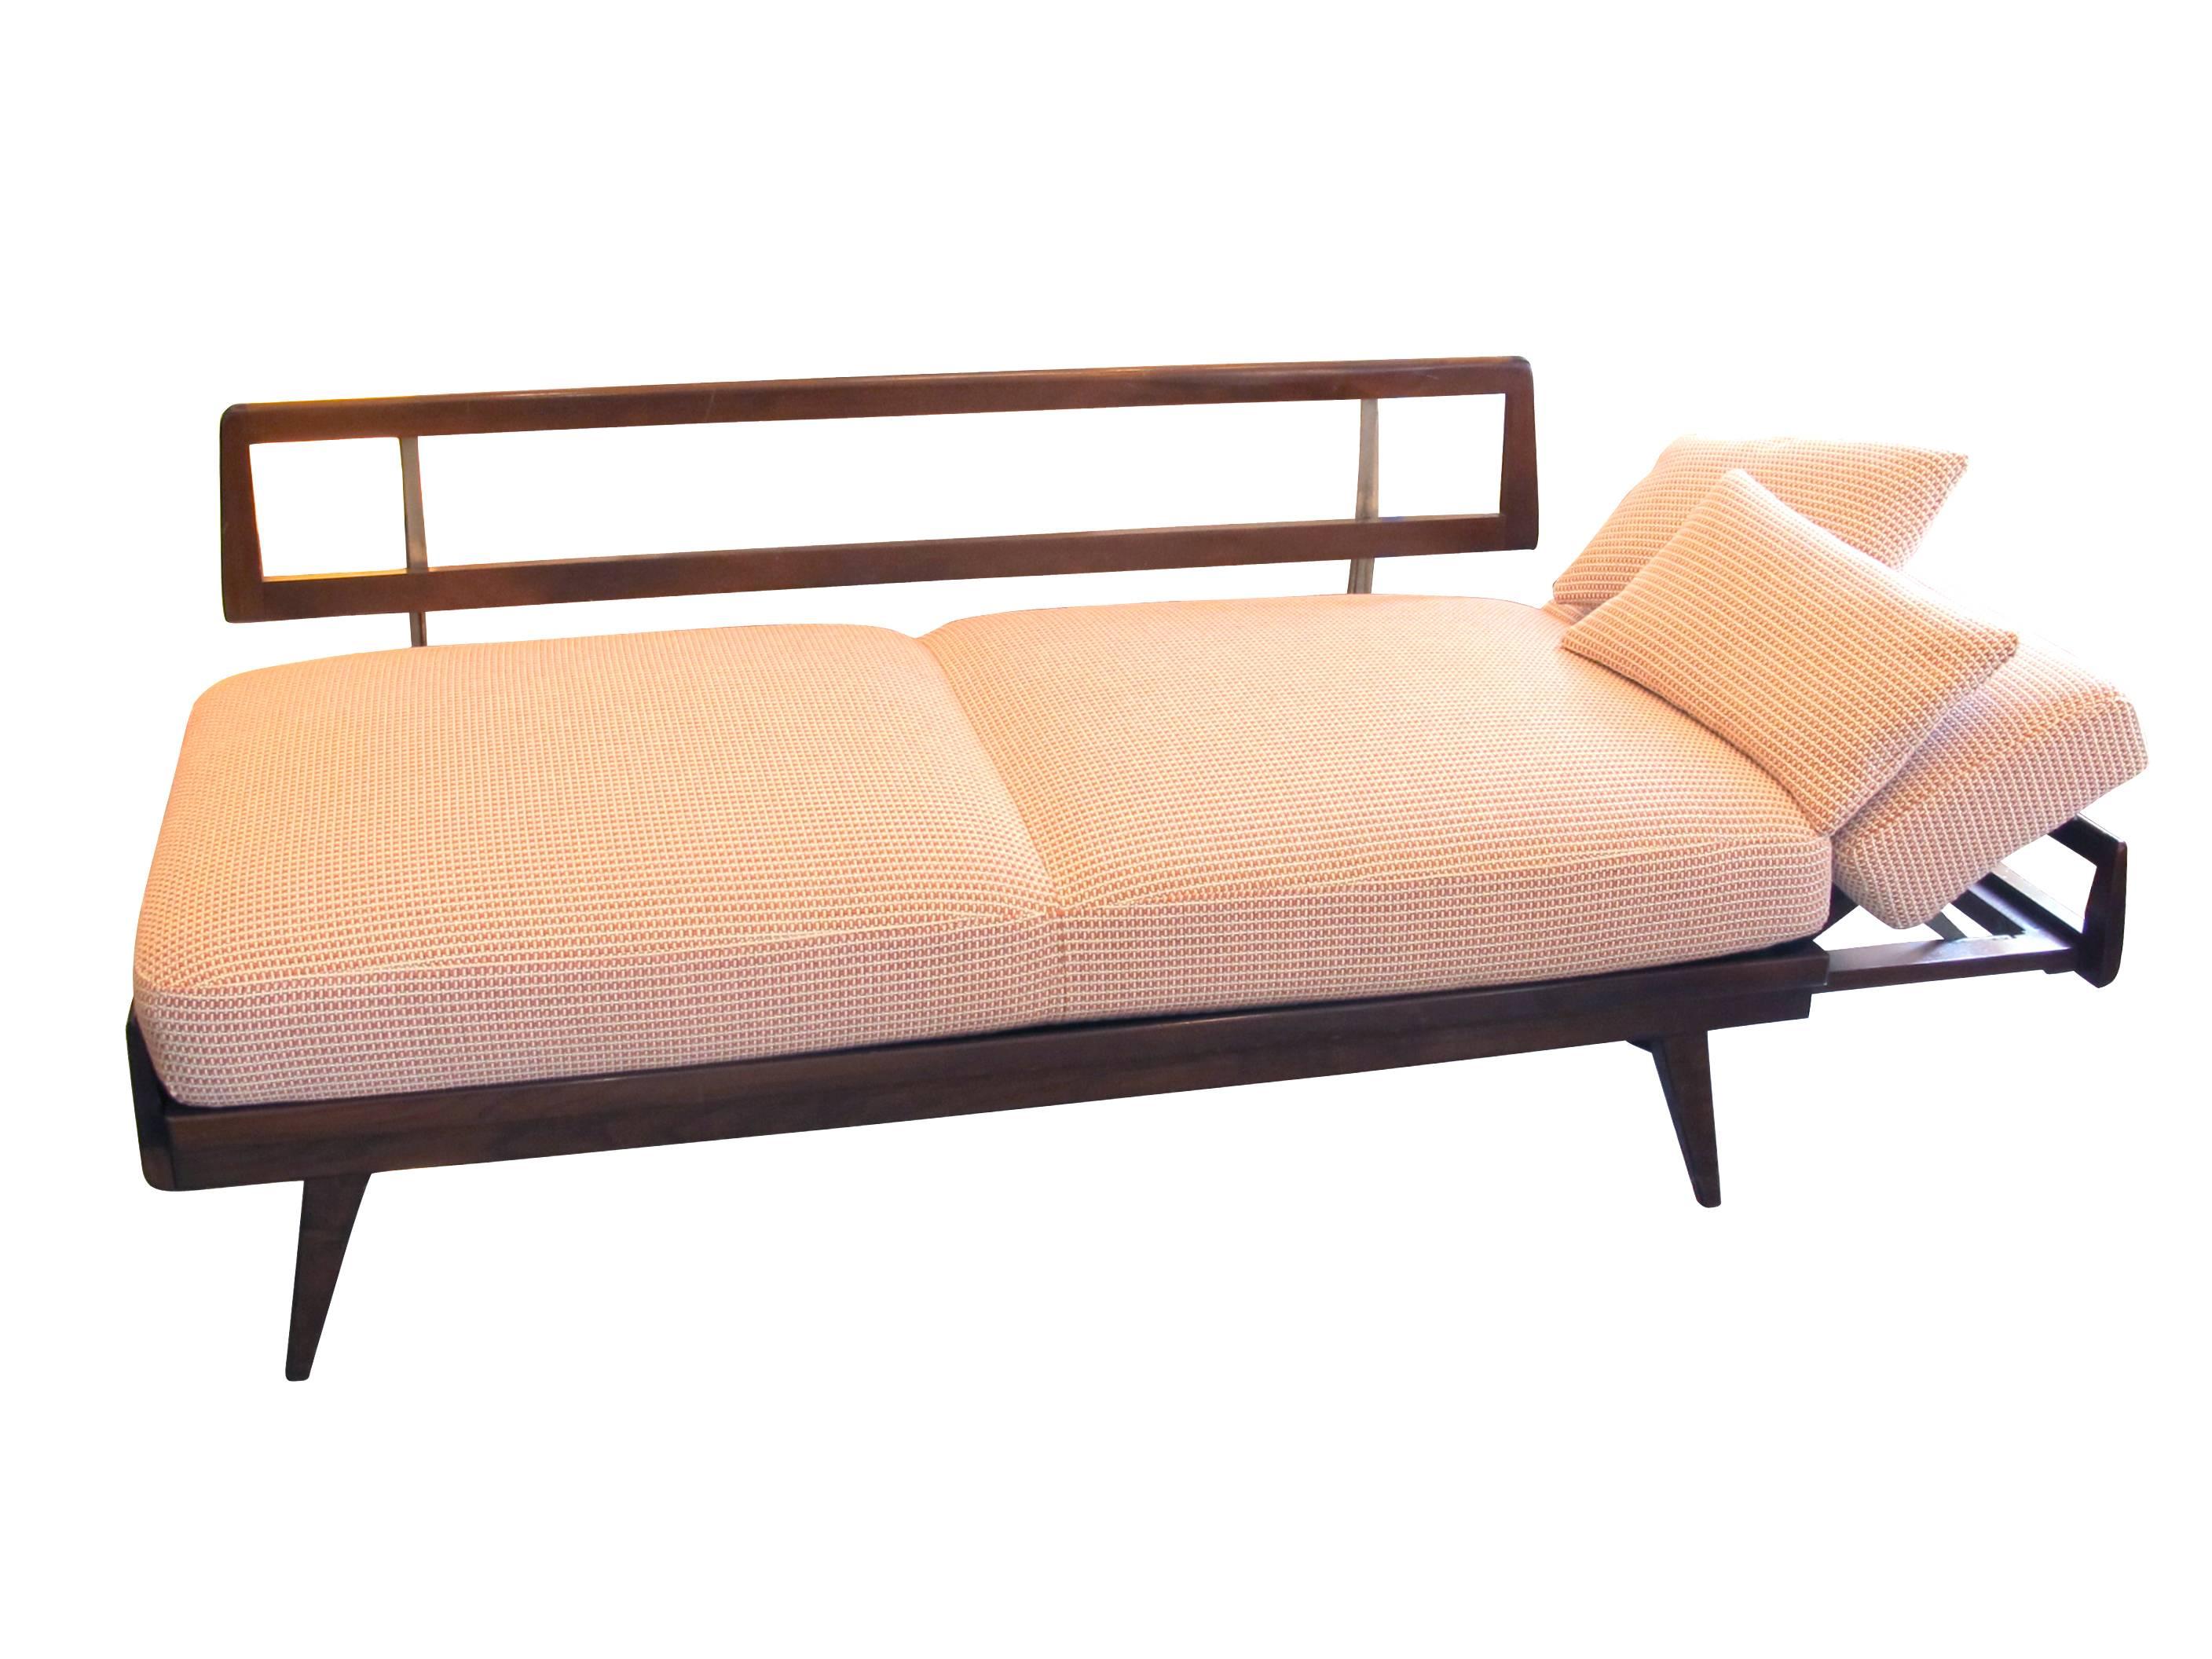 German 1950s Couch or Daybed by Wilhelm Knoll for Knoll Antimott, New Upholstery